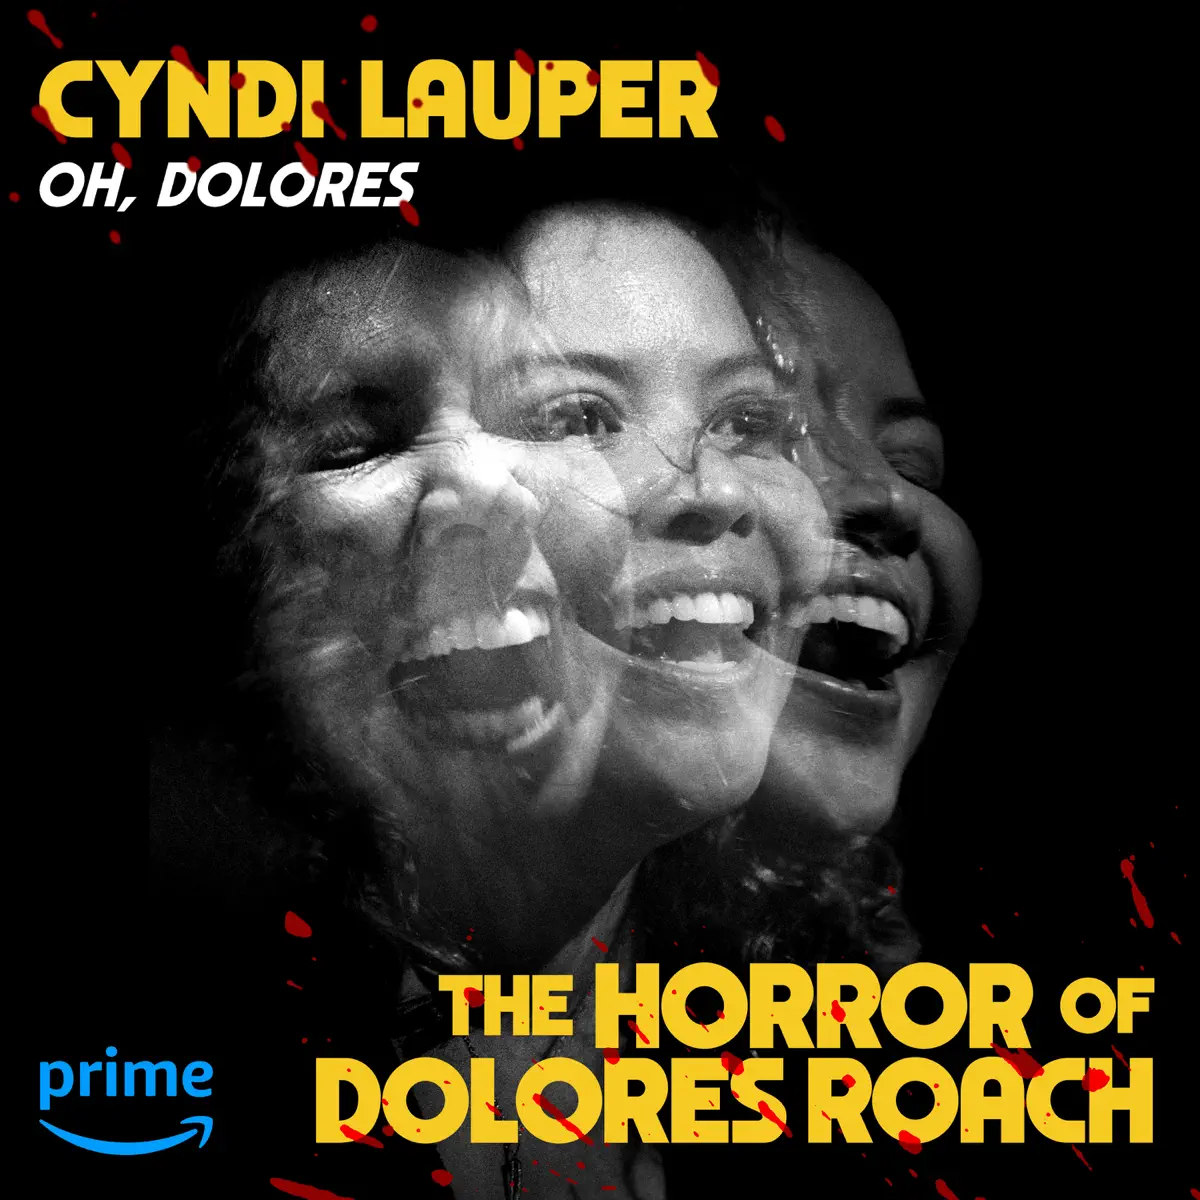 Cyndi Lauper - Oh Dolores (From The Horror of Dolores Roach) - Single (2023) [iTunes Plus AAC M4A]-新房子